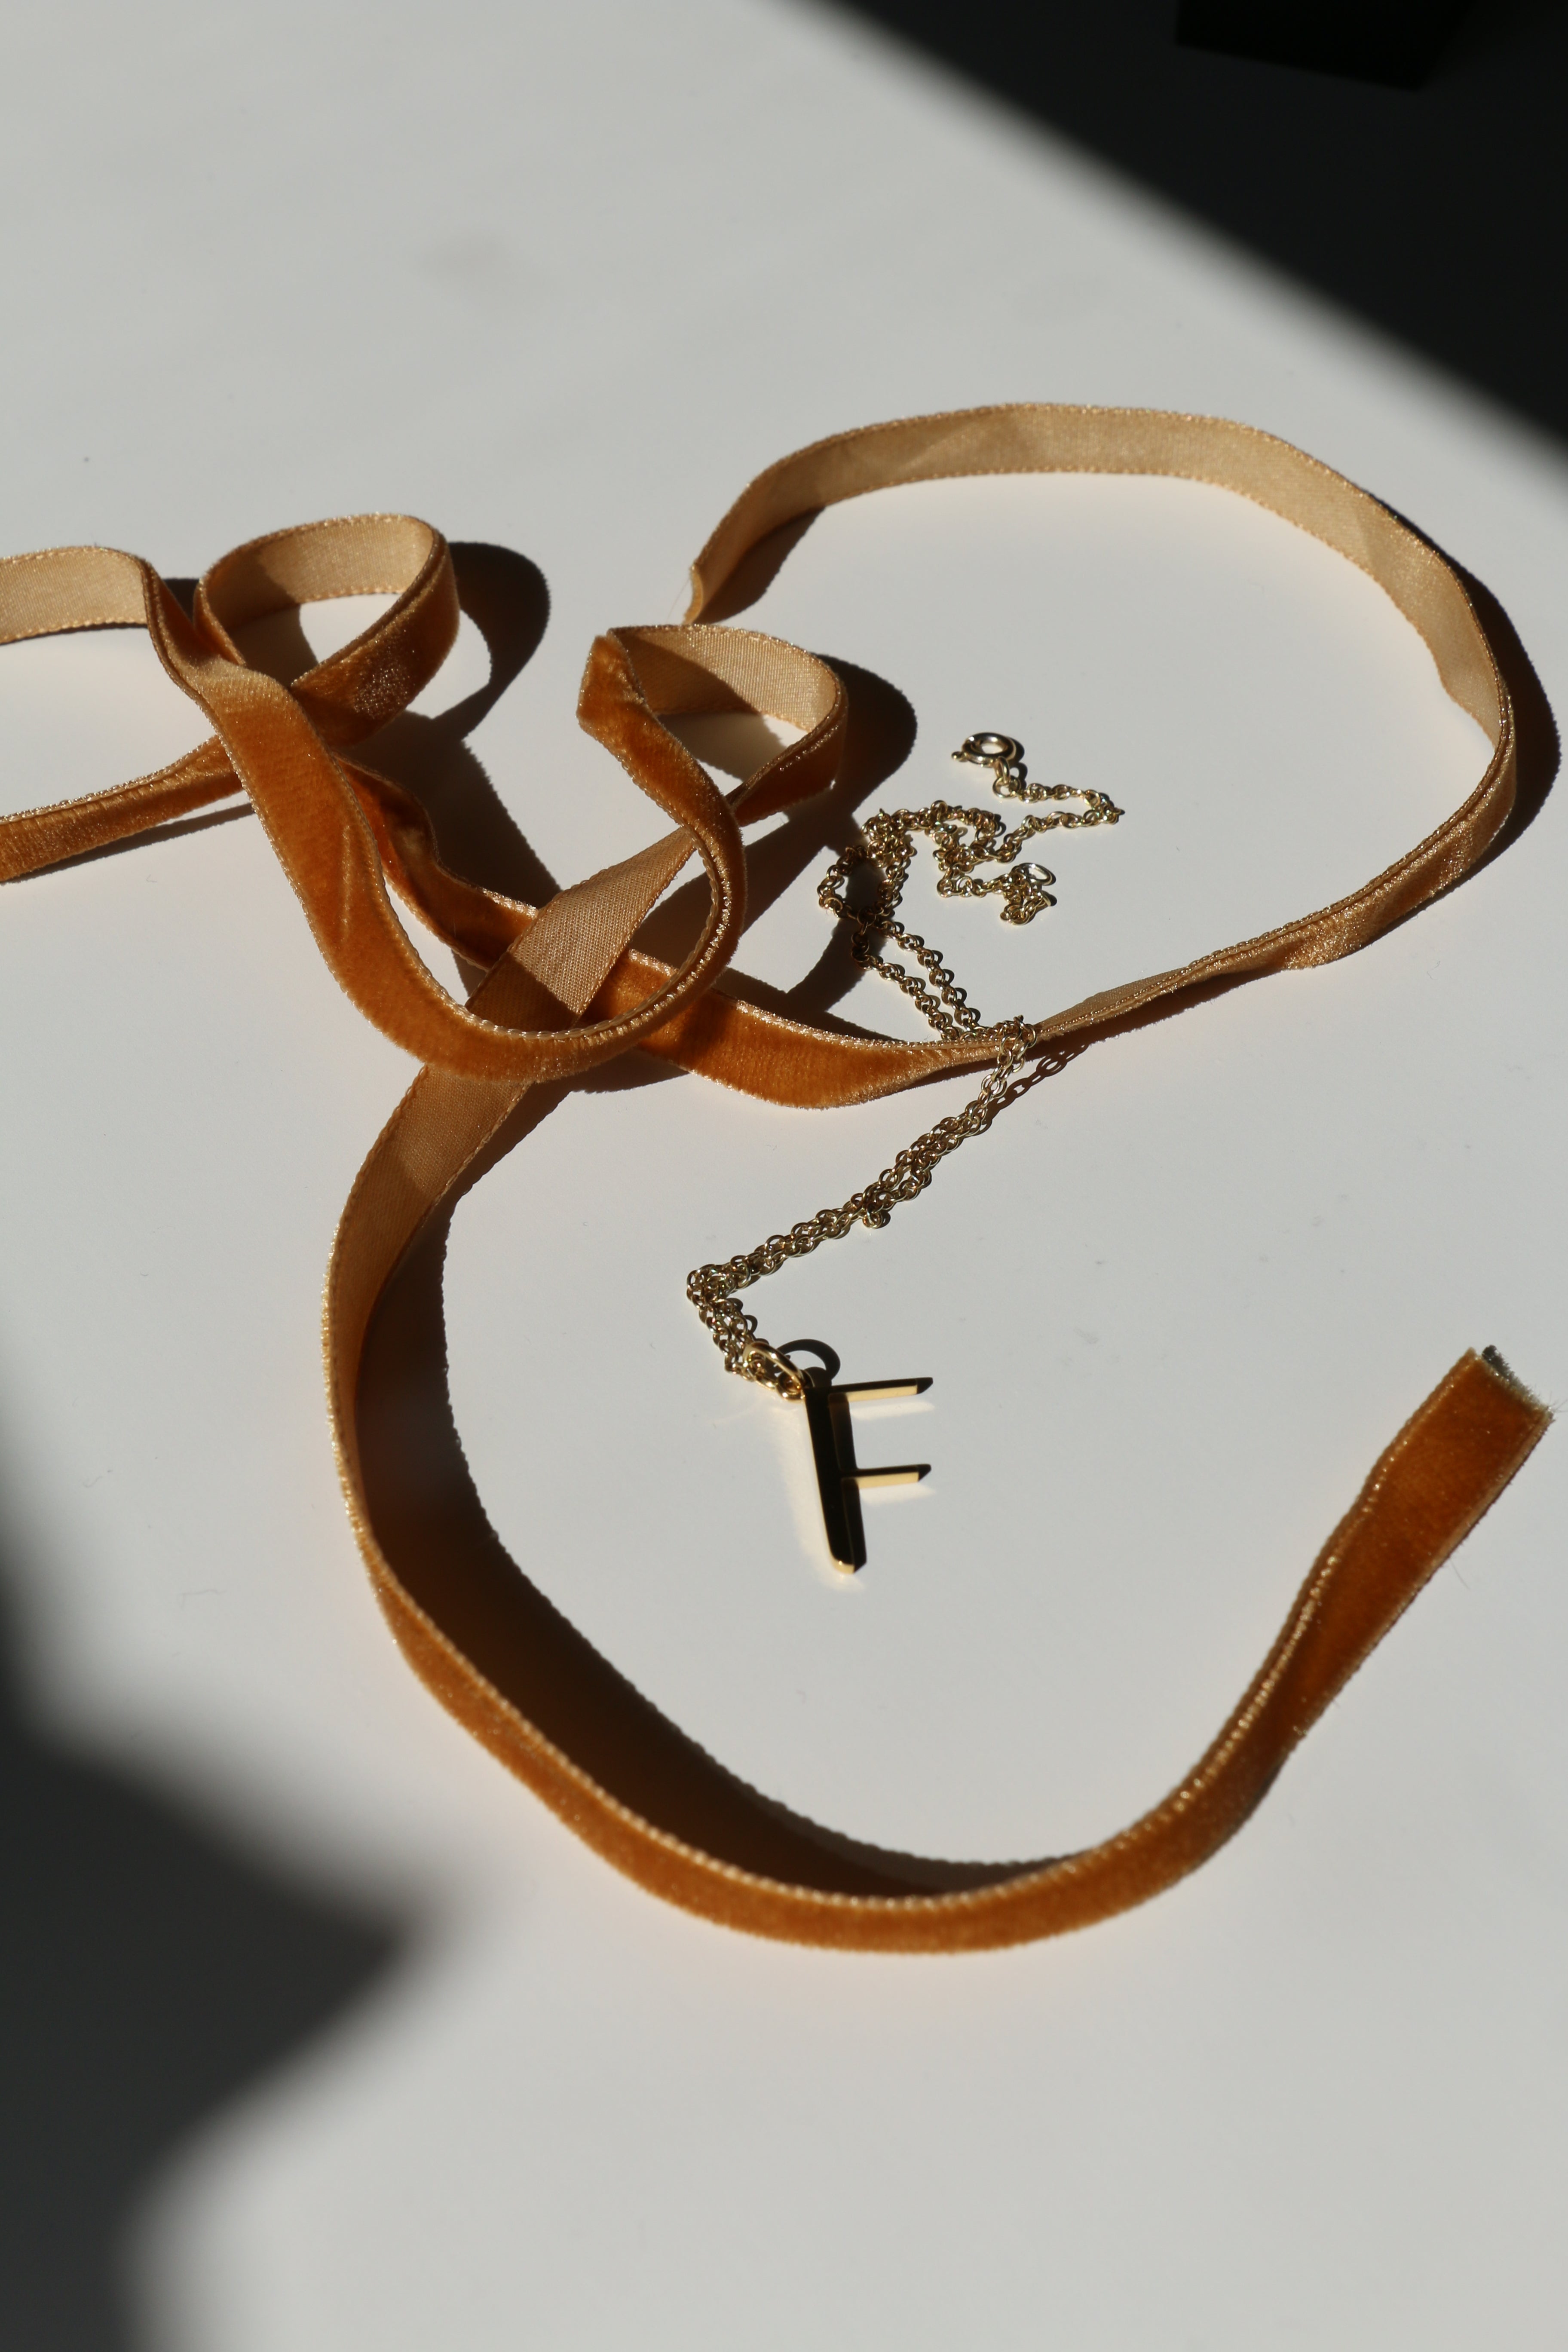 F initial necklace on a white background with shadows and mustard velvet ribbon snaking around it